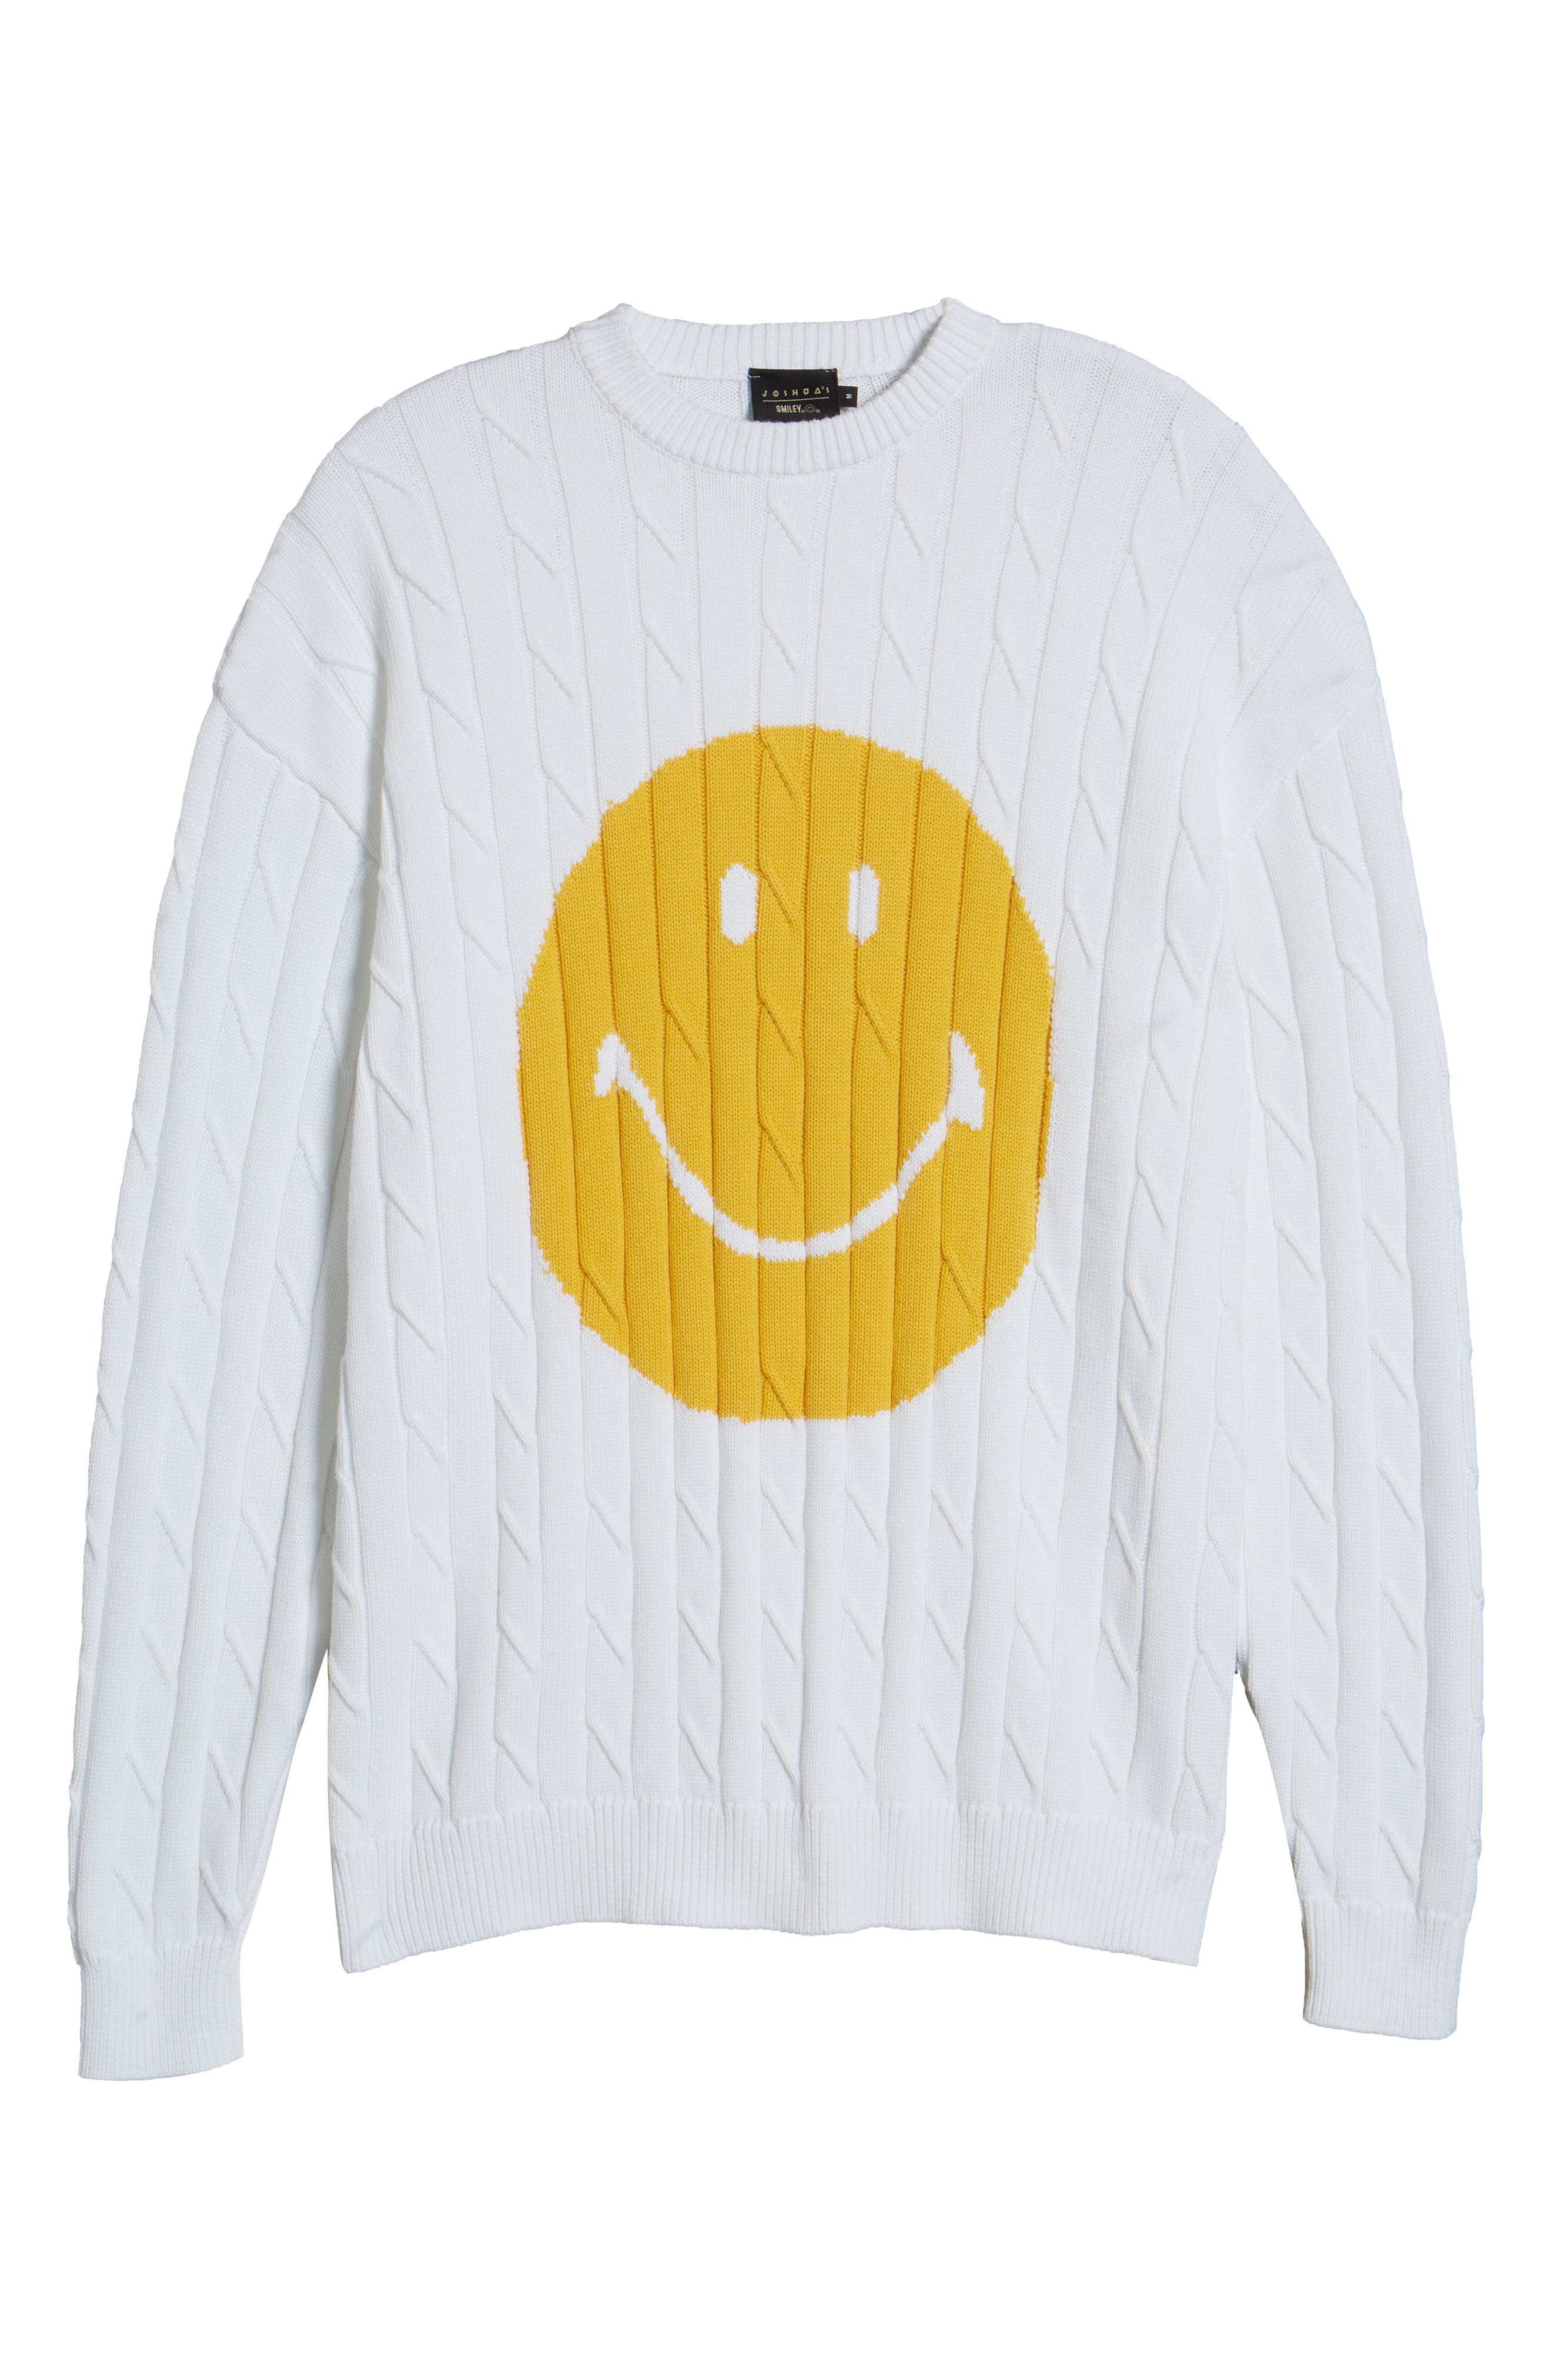 RSunshine Mens Notes Printed Knitwear Long Sleeve Pullover Sweaters Tee